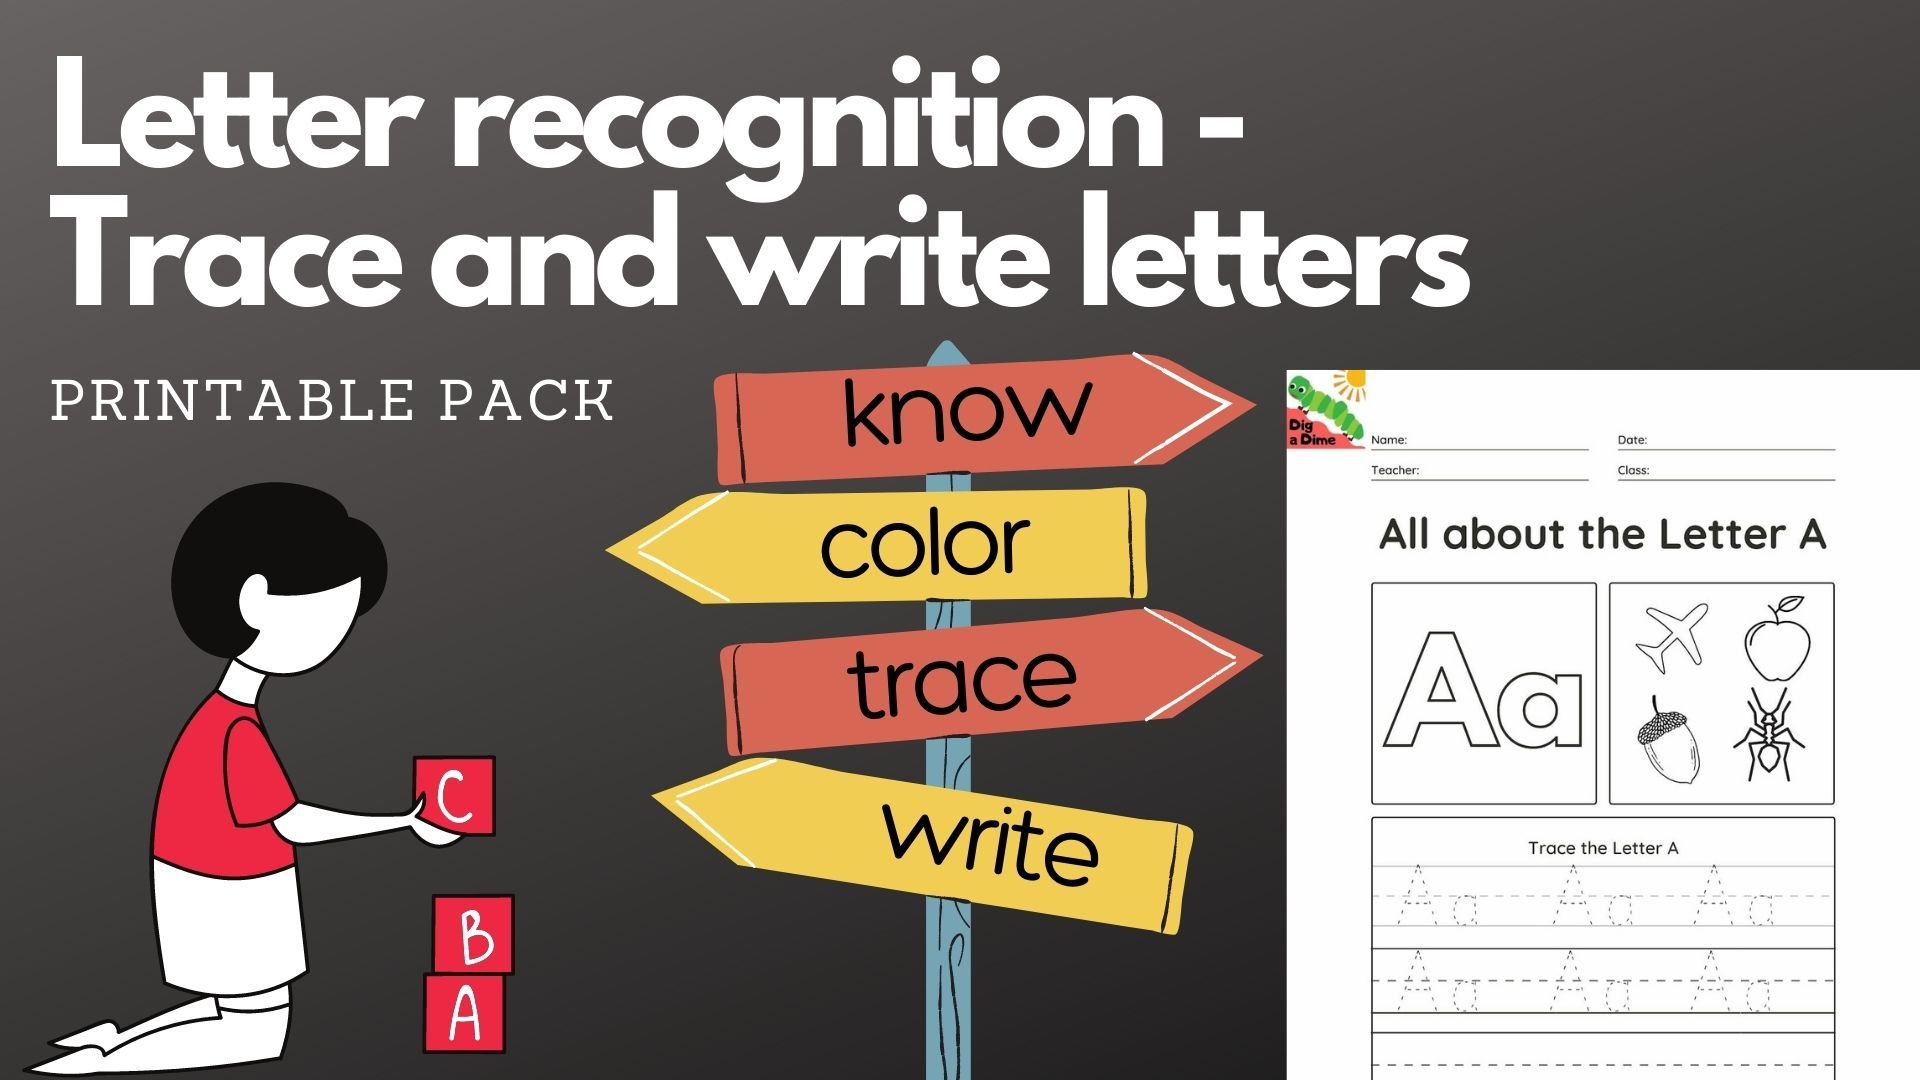 Letter recognition - Trace letters/ alphabets (upper and lower case)